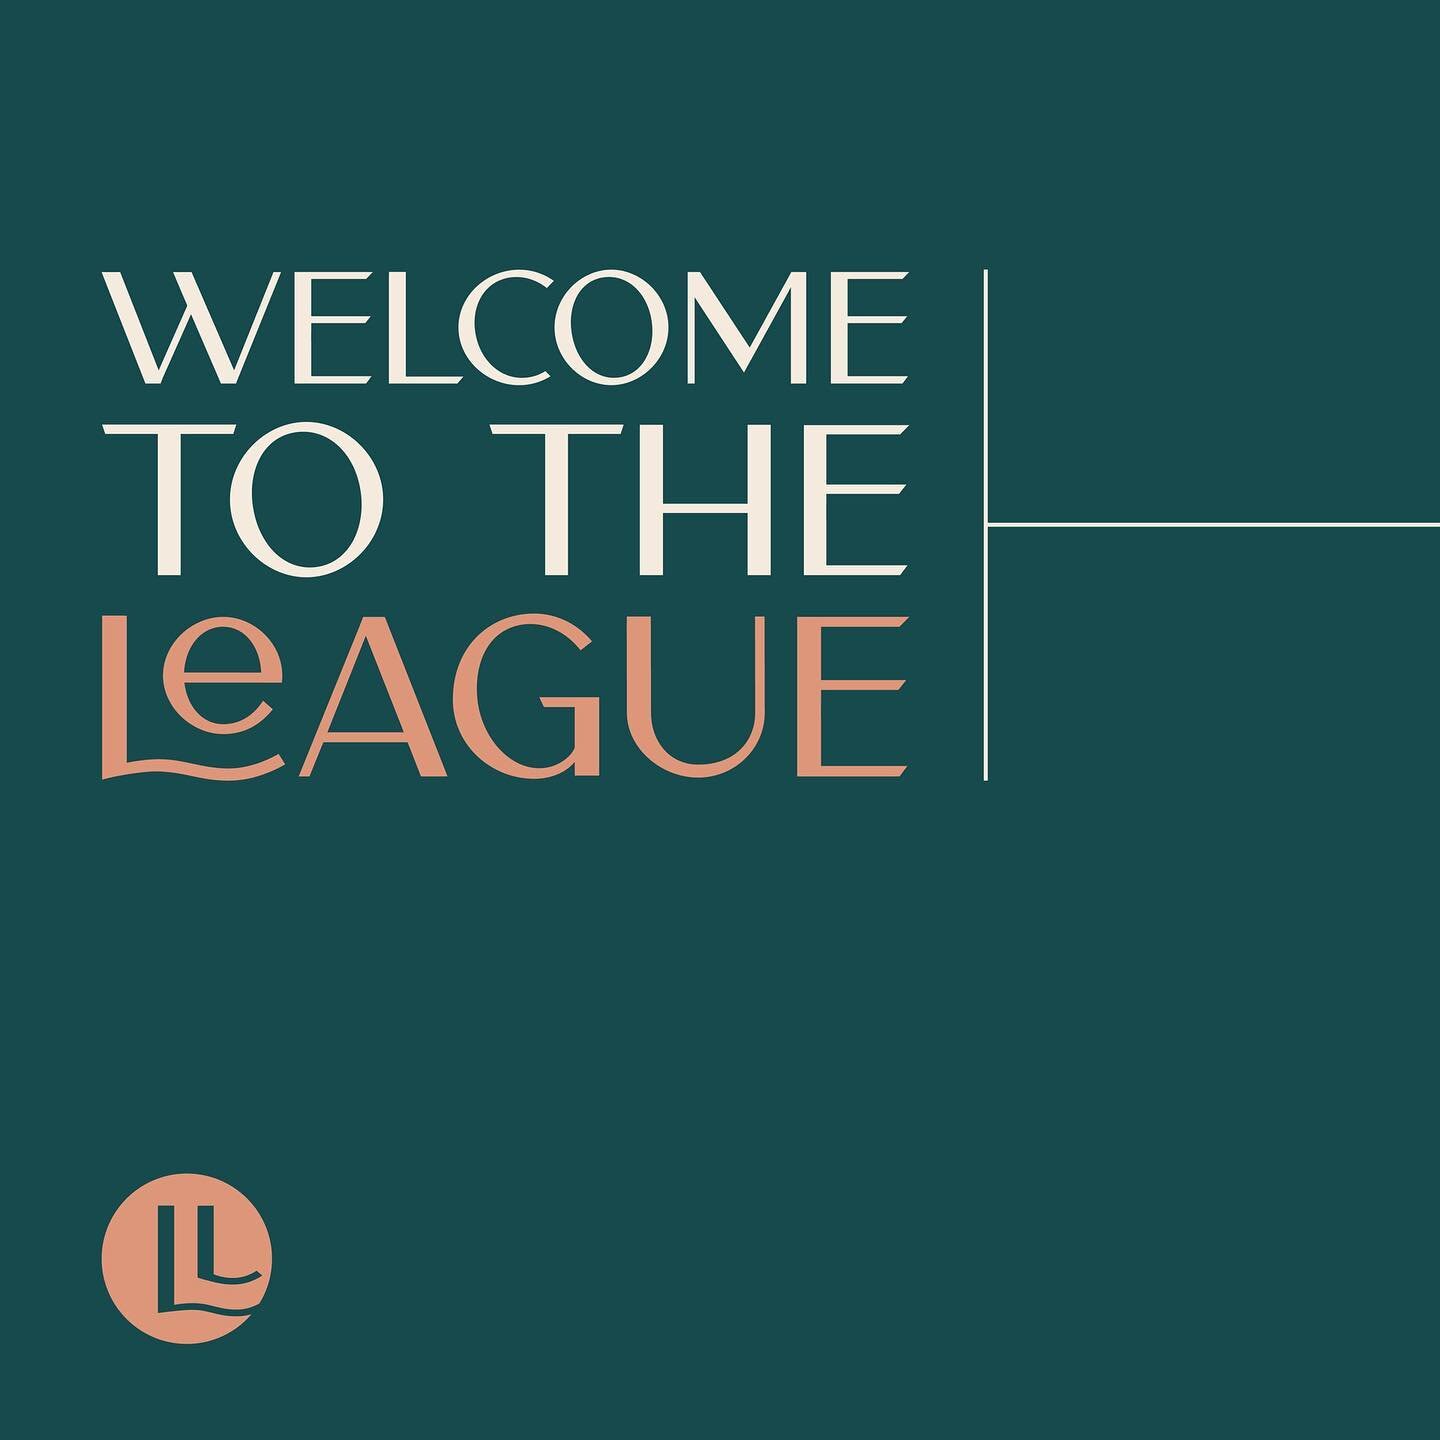 This month we&rsquo;re giving a warm welcome to 4 more chapters joining the Literary League community&mdash; including a new chapter across the pond! 
⠀⠀⠀⠀⠀⠀⠀⠀⠀
1. Memphis, TN Chapter hosted by Emily @emilybeene 
2. Iowa City, IA Chapter hosted by Sa